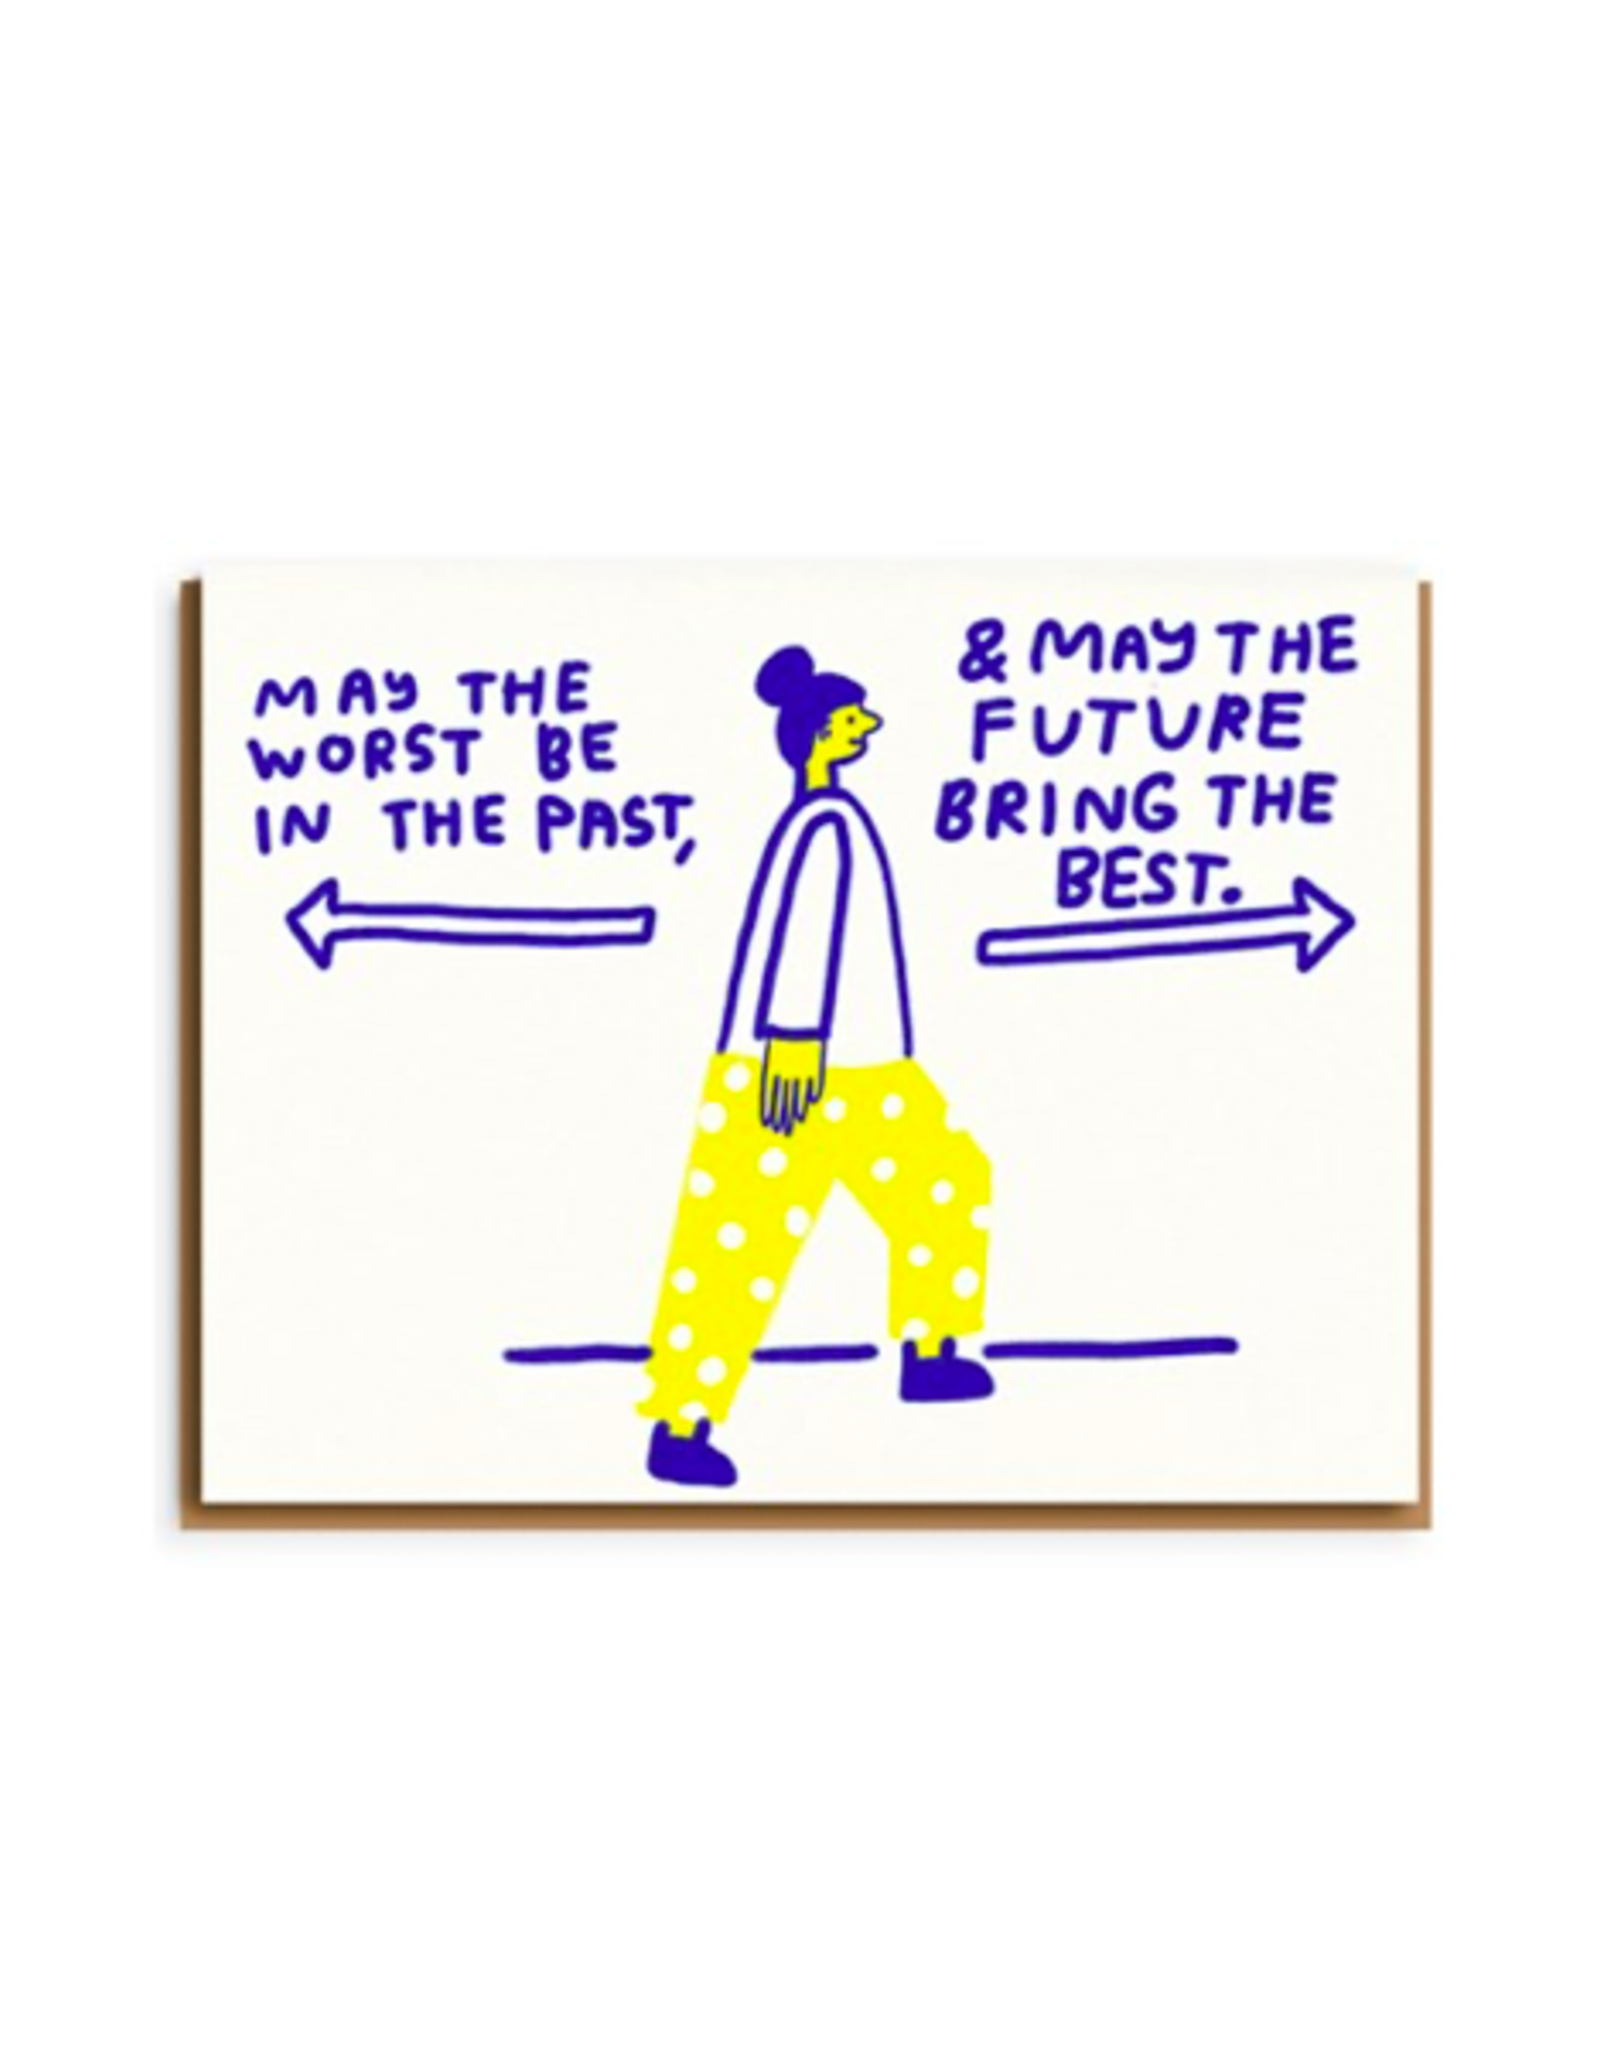 PPS - Card / May The Worst be in the Past & May the Future Bring the Best, 4.25 x 5.5"